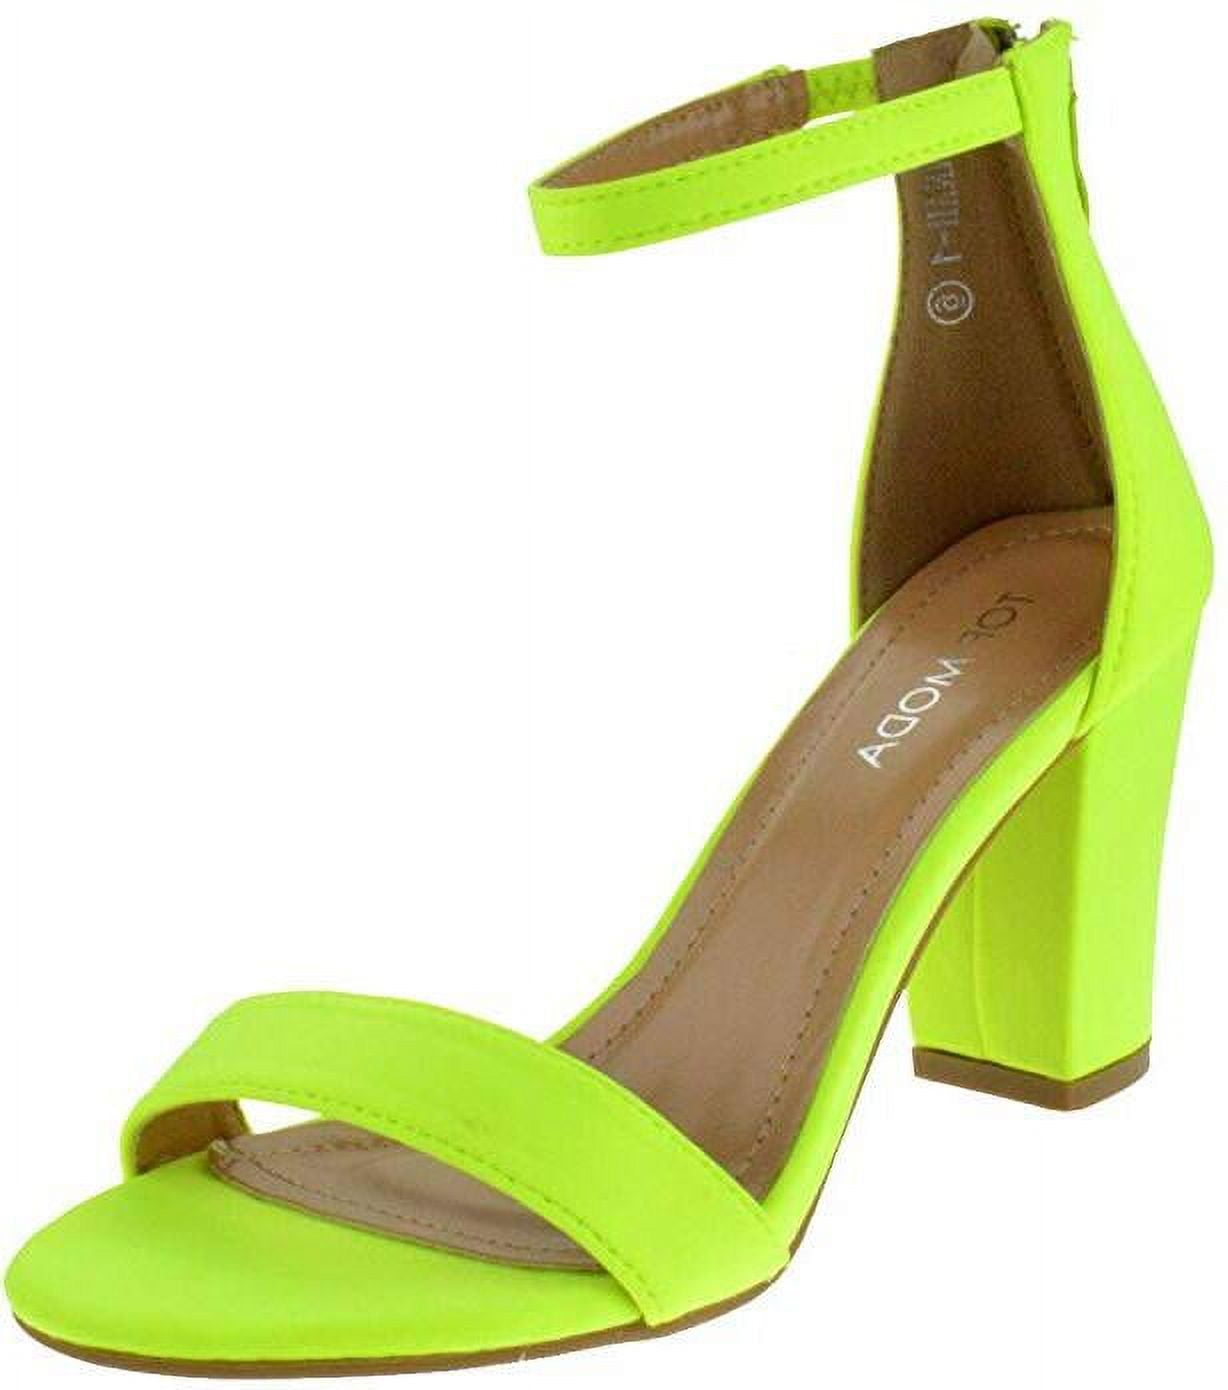 Kcenid Womens Chunky Heel Nude Block Heel Sandals Super High, Square Toe,  Cross Tied Pumps For Fashionable Parties Green 210712 From Kong07, $23.53 |  DHgate.Com